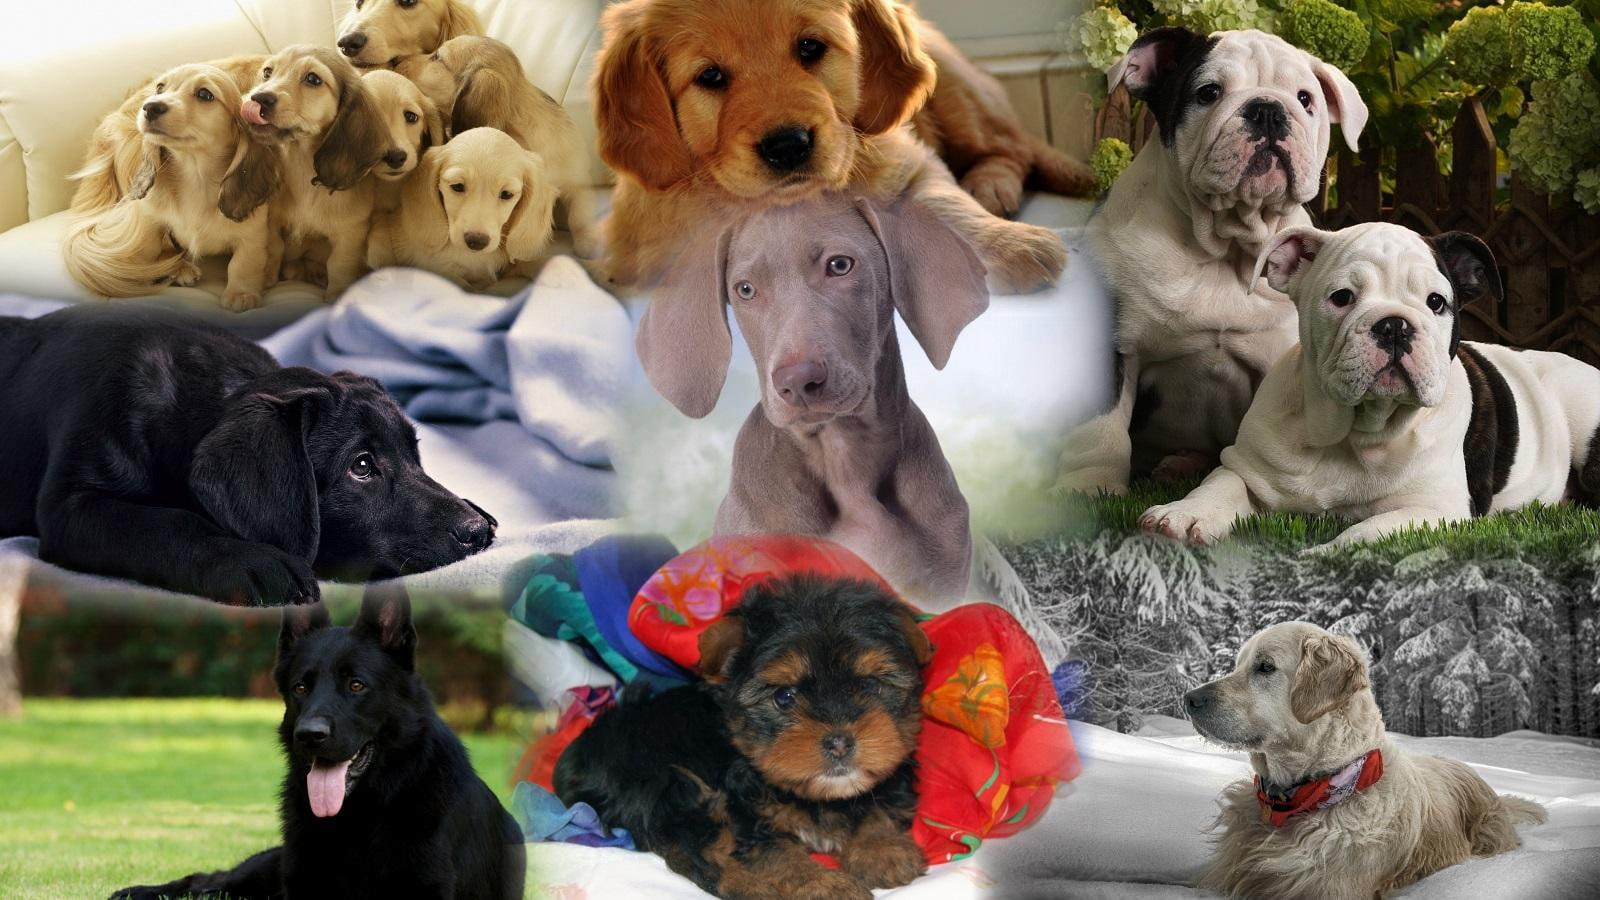 Our Best Friends, puppy litter, collage, breeds, animals, dogs